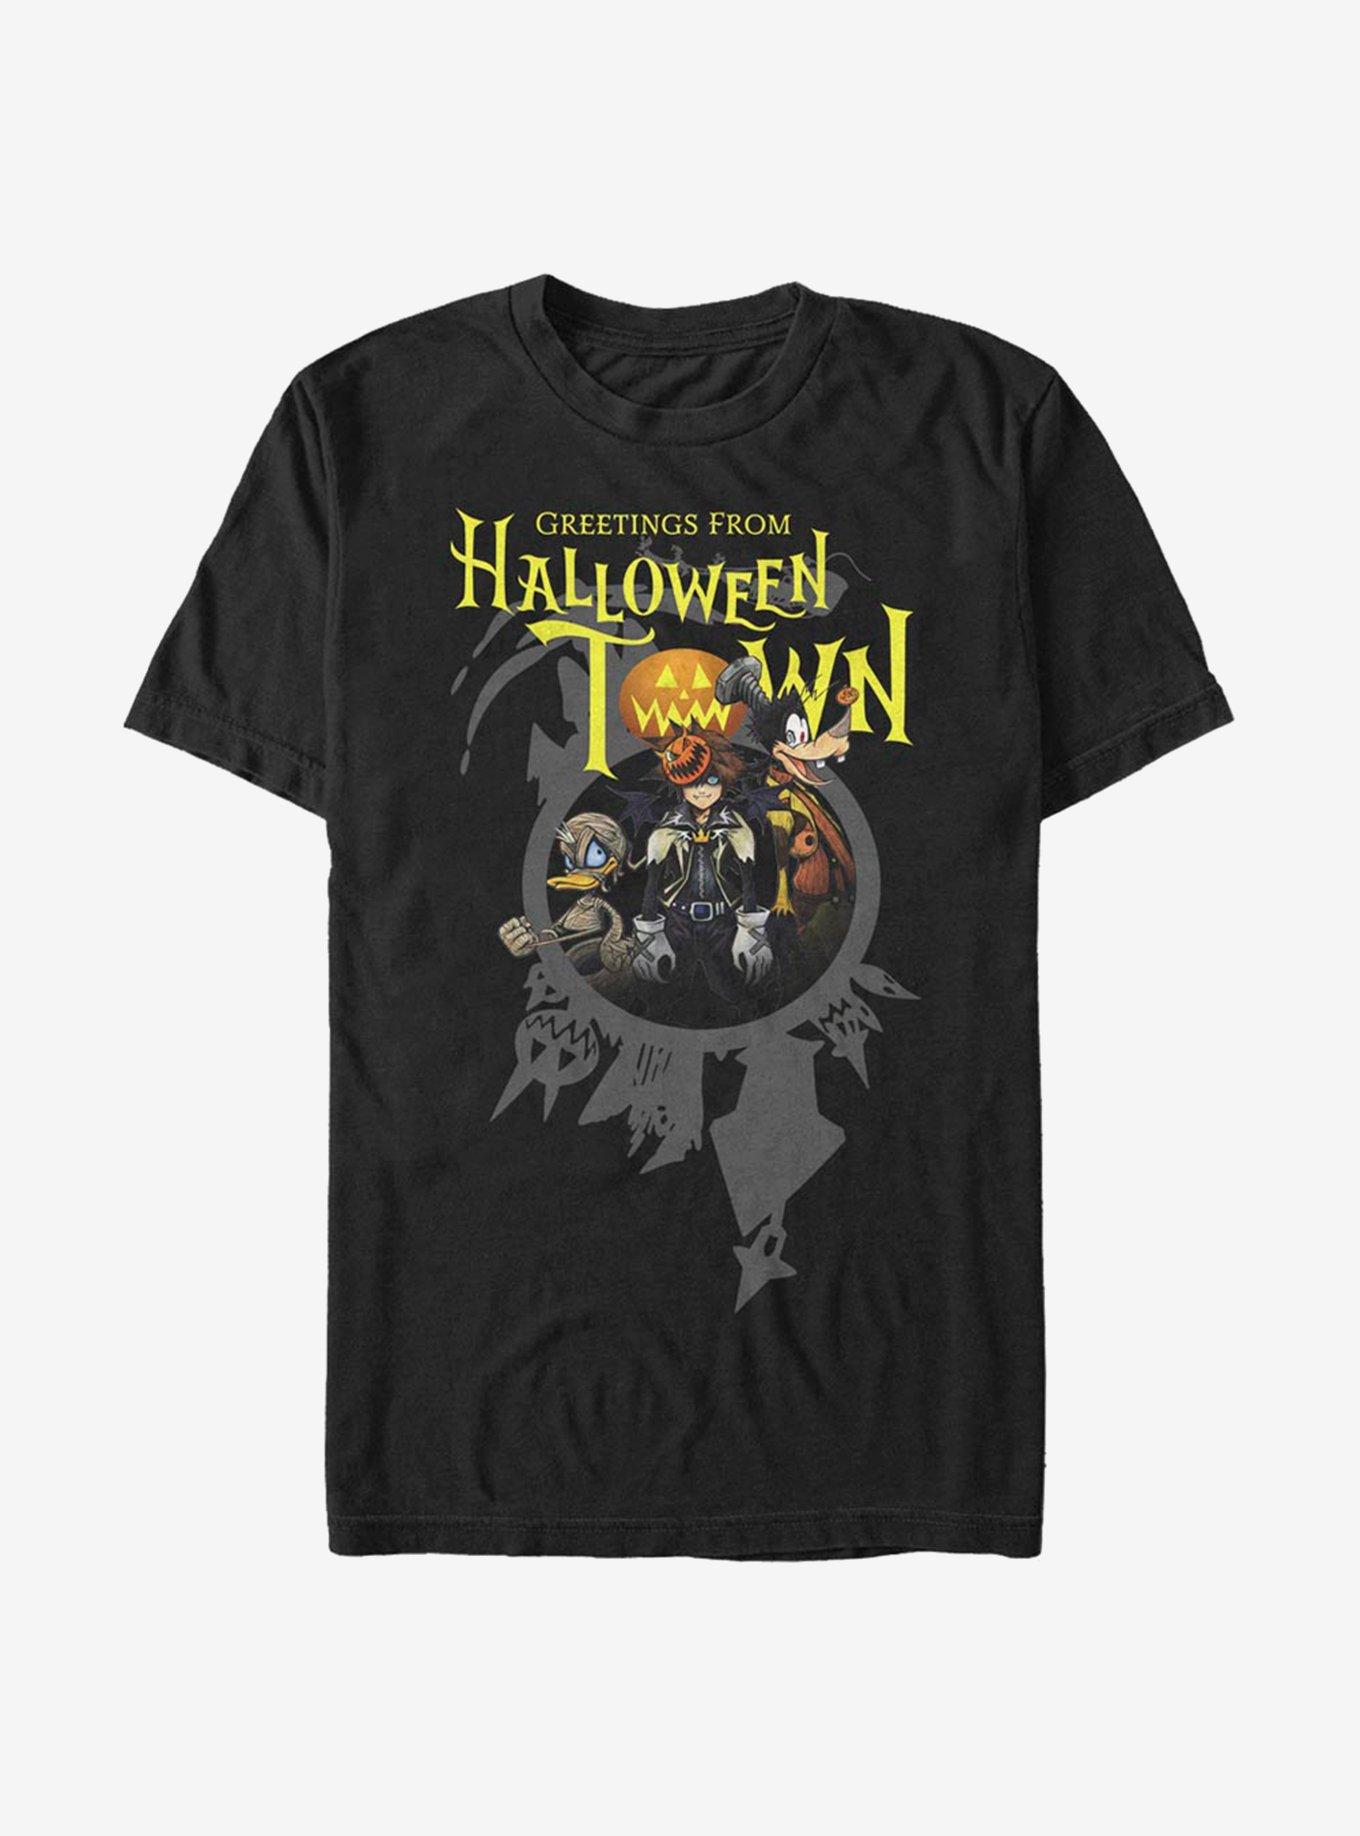  Big and Tall Halloween Shirts for Men Plus Size XL 2XL